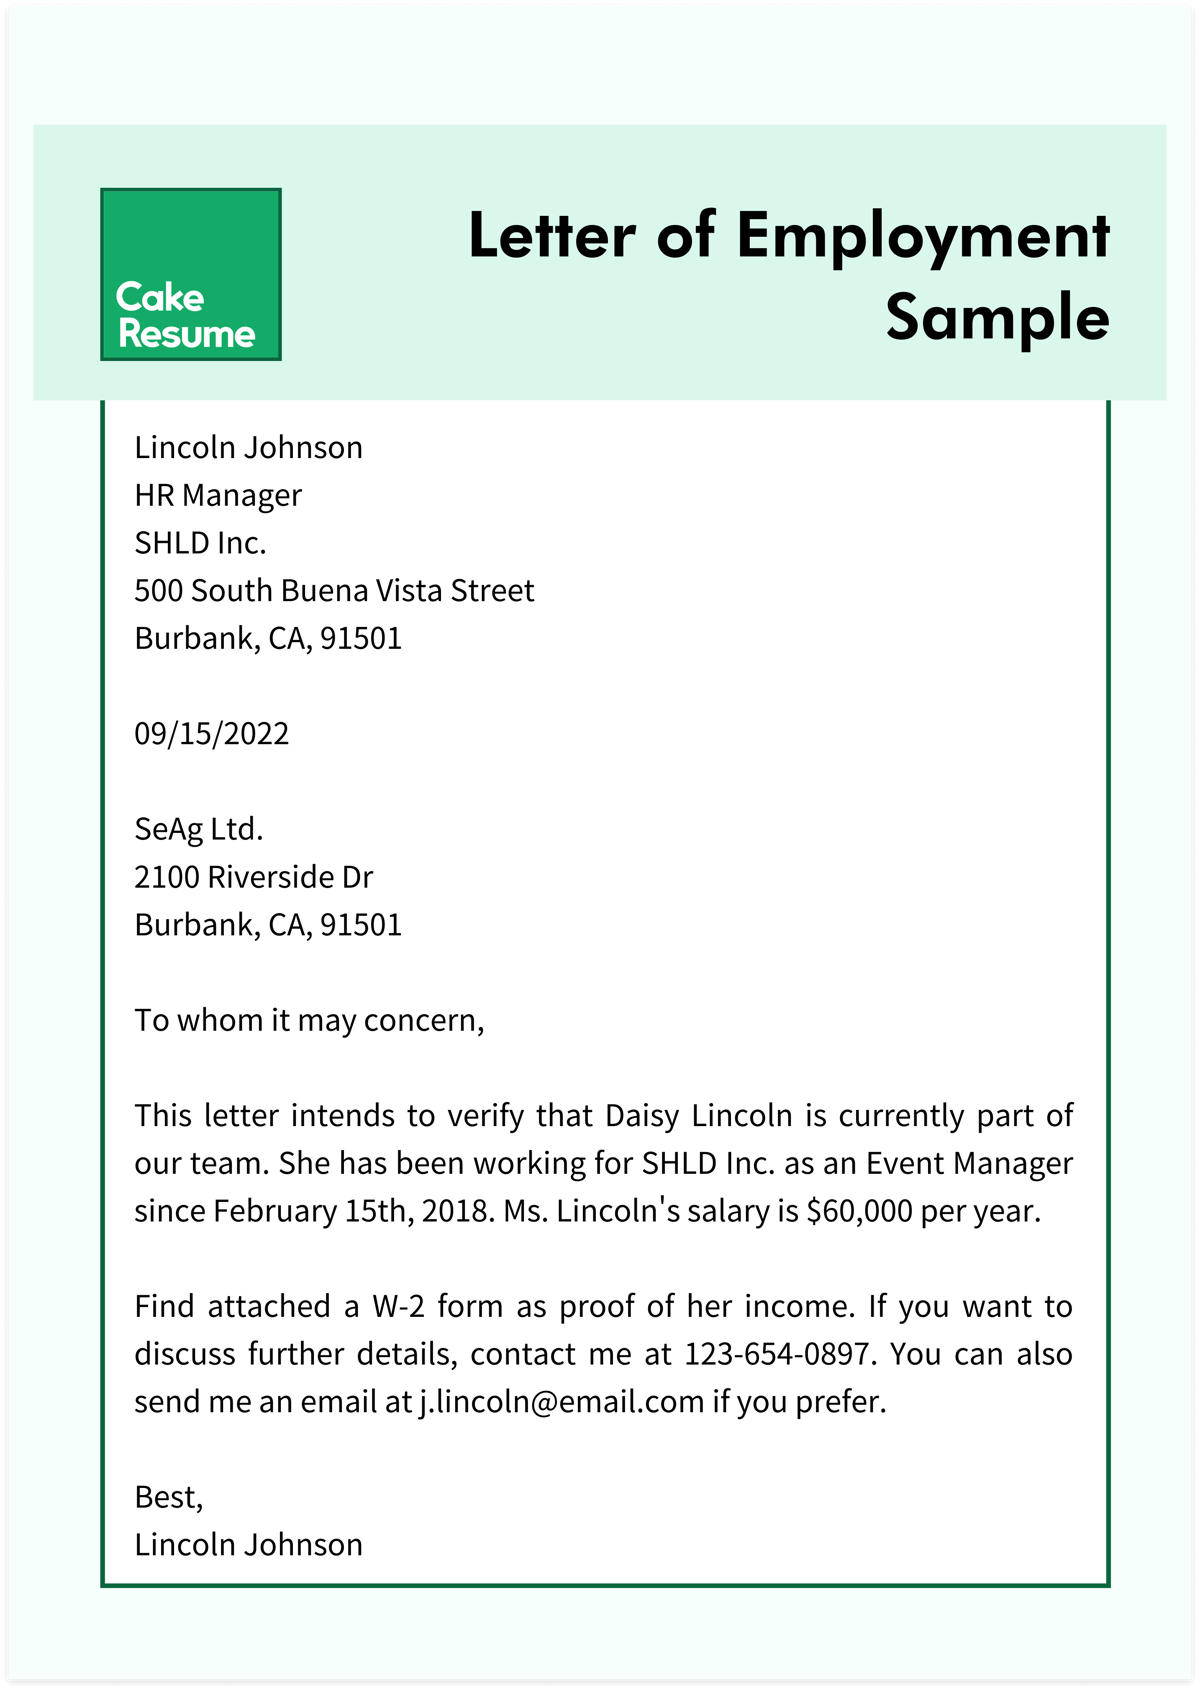 Letter of Employment Sample